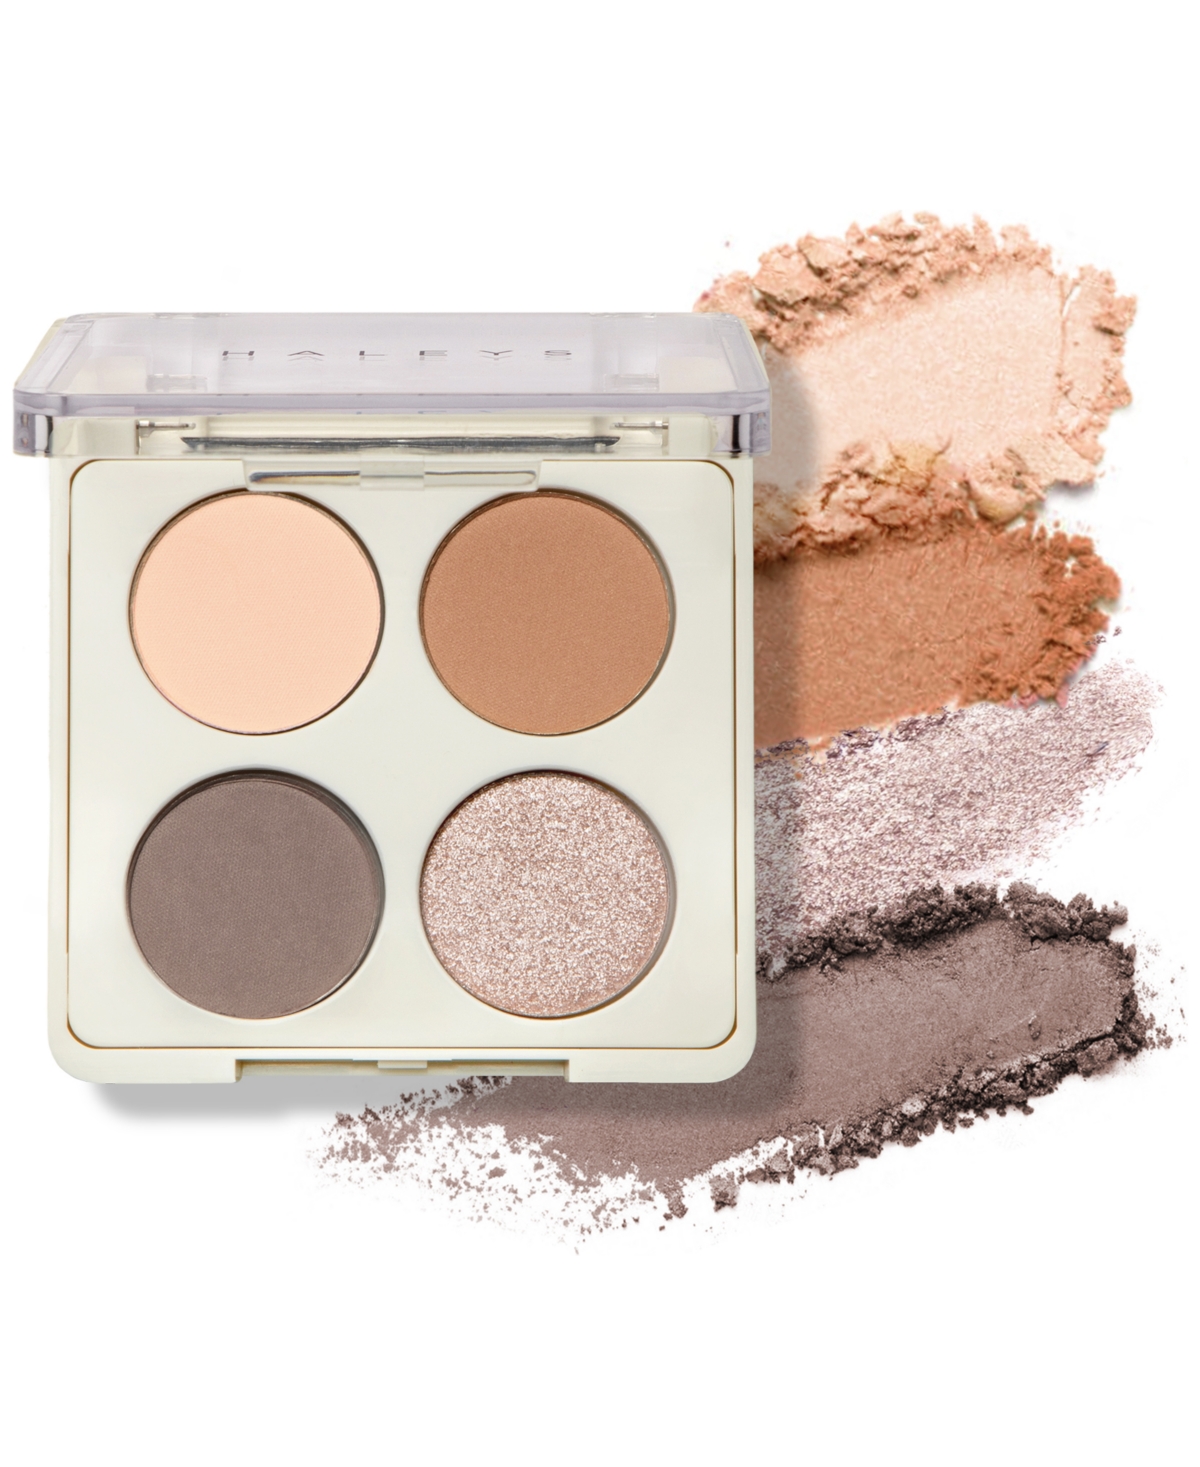 Haleys Beauty Re-Play "The Everything" Eyeshadow Quad Palette